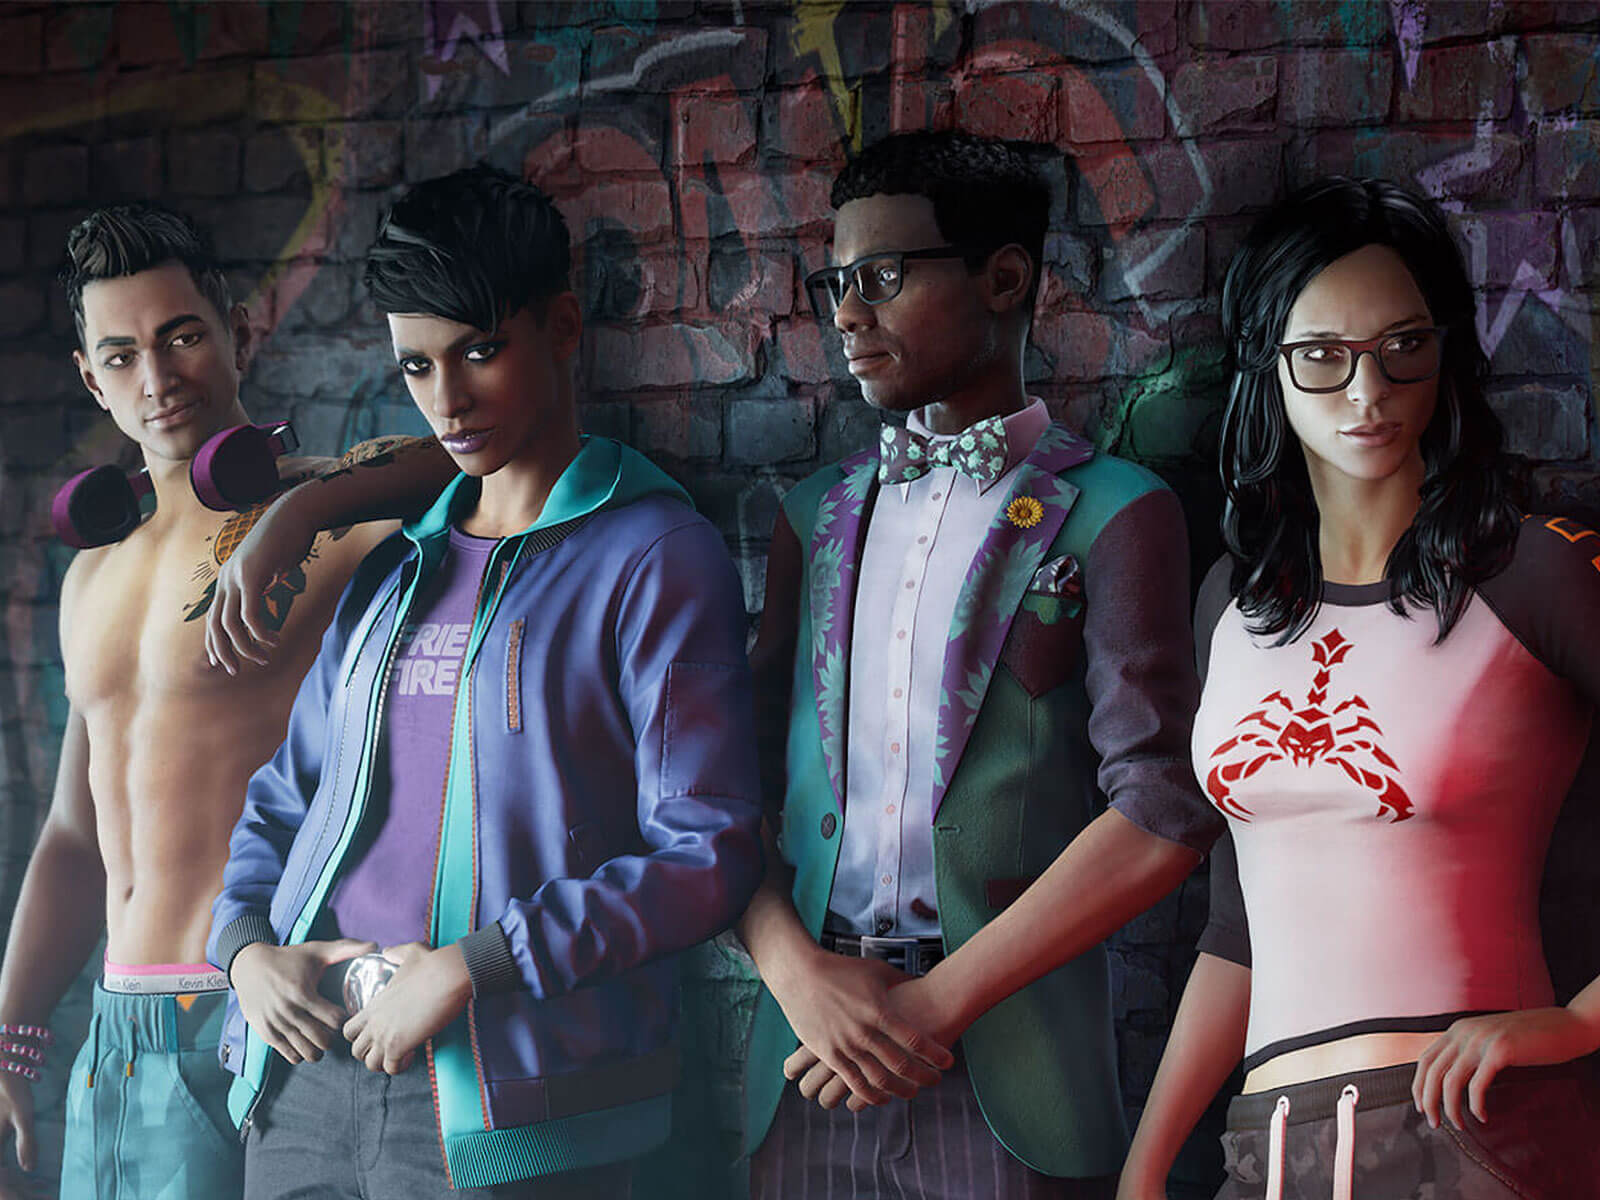 Four Saints Row IV characters pose against a brick wall with graffiti on it